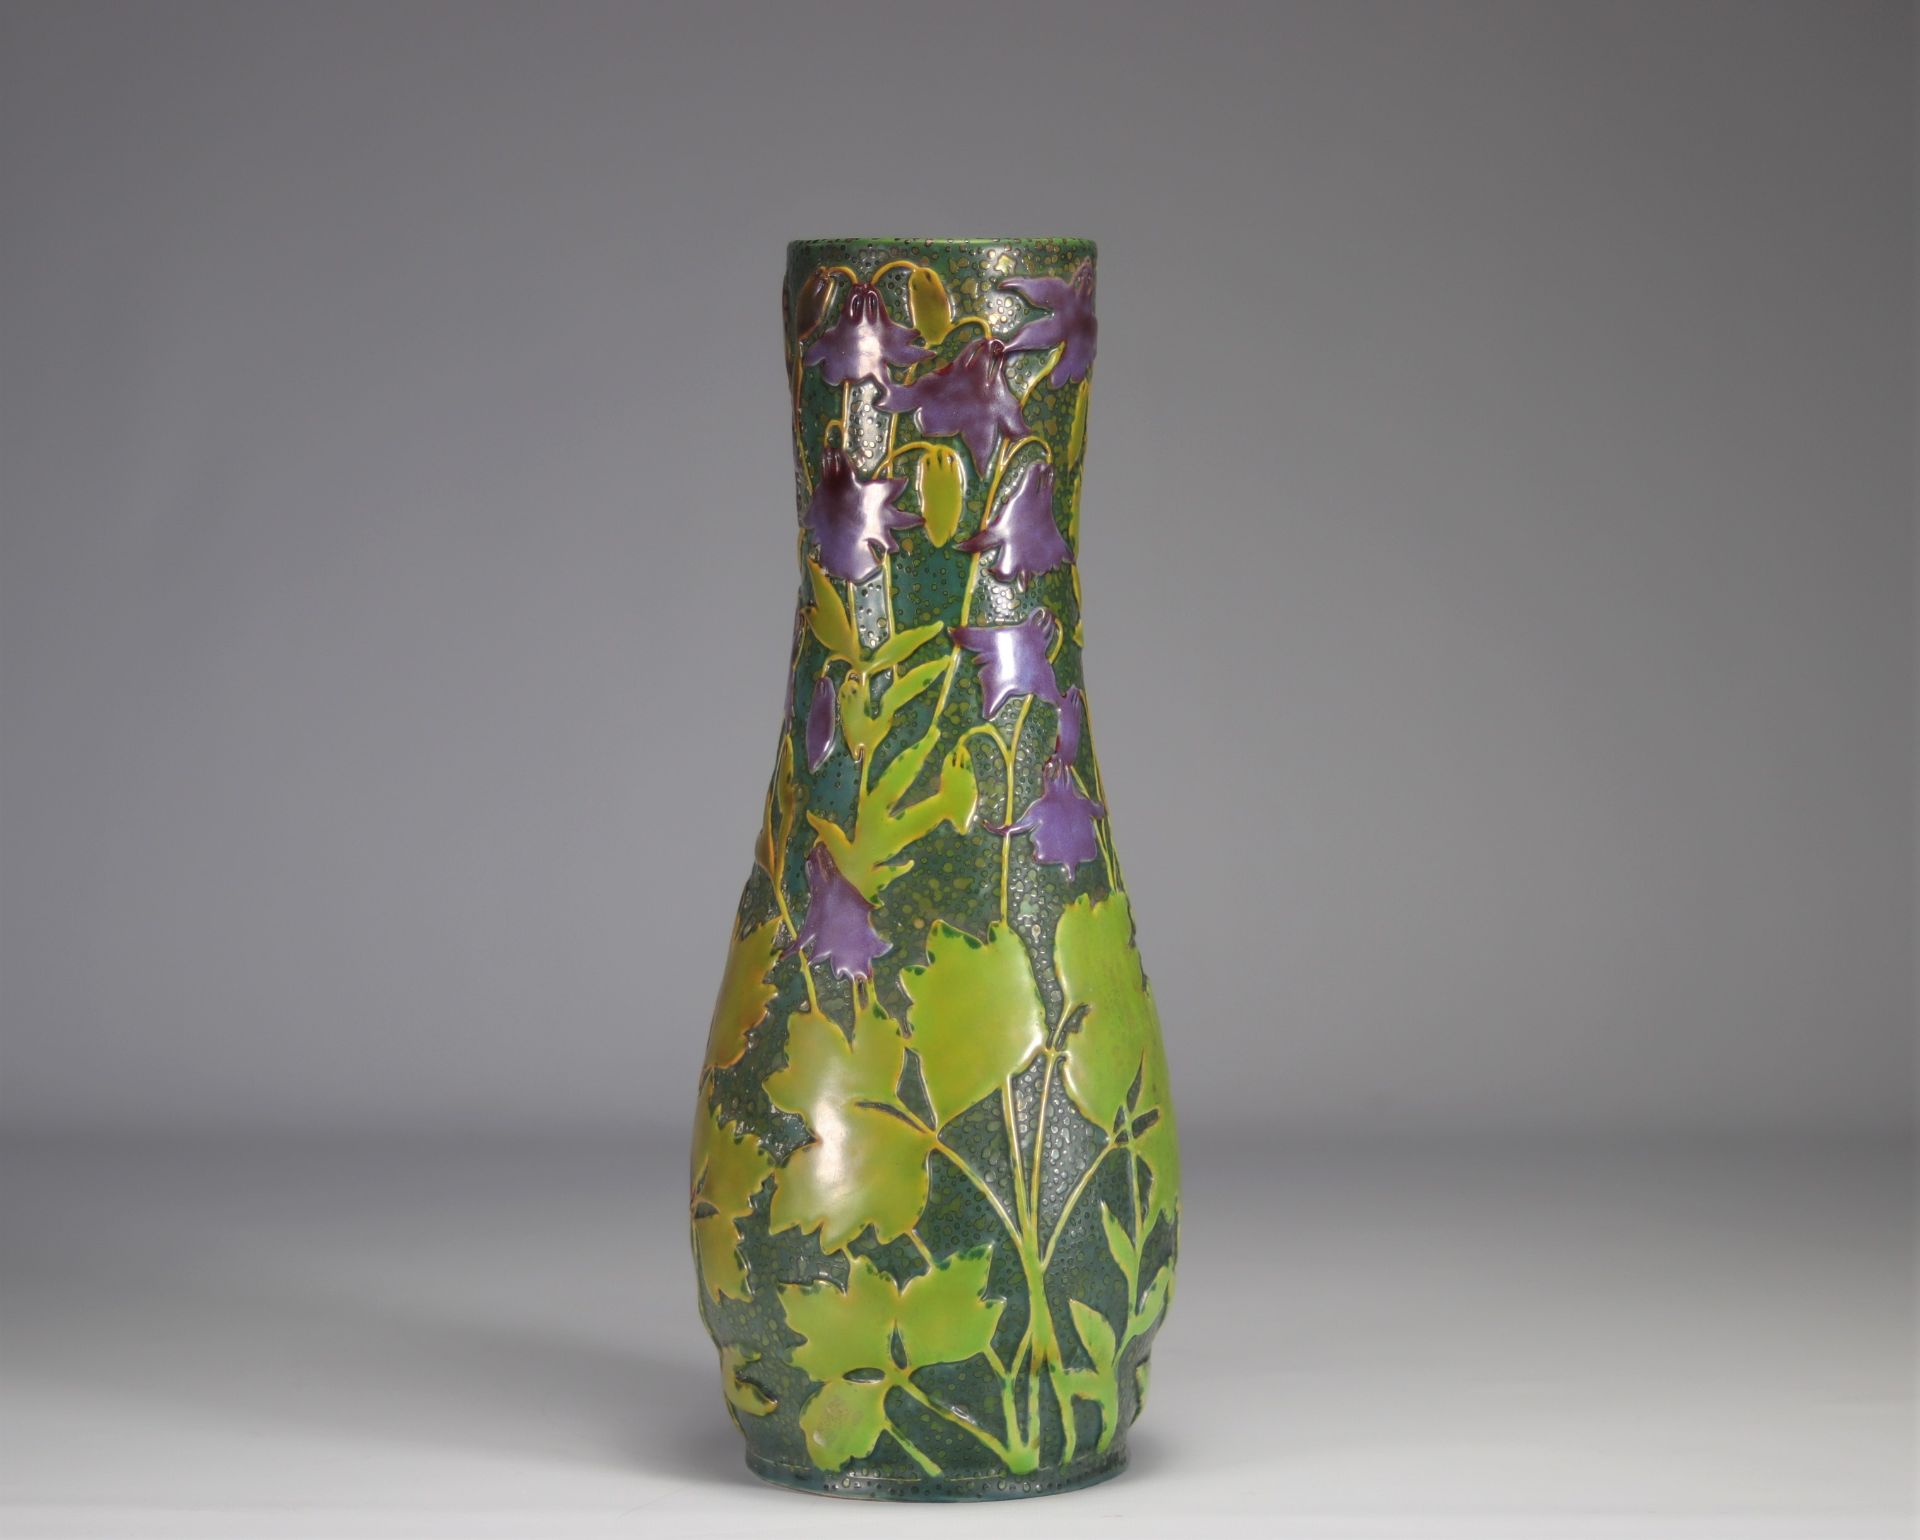 Vilmos ZSOLNAY (1840 - 1900) rare Art Nouveau vase decorated with purple flowers on a green backgrou - Image 5 of 6